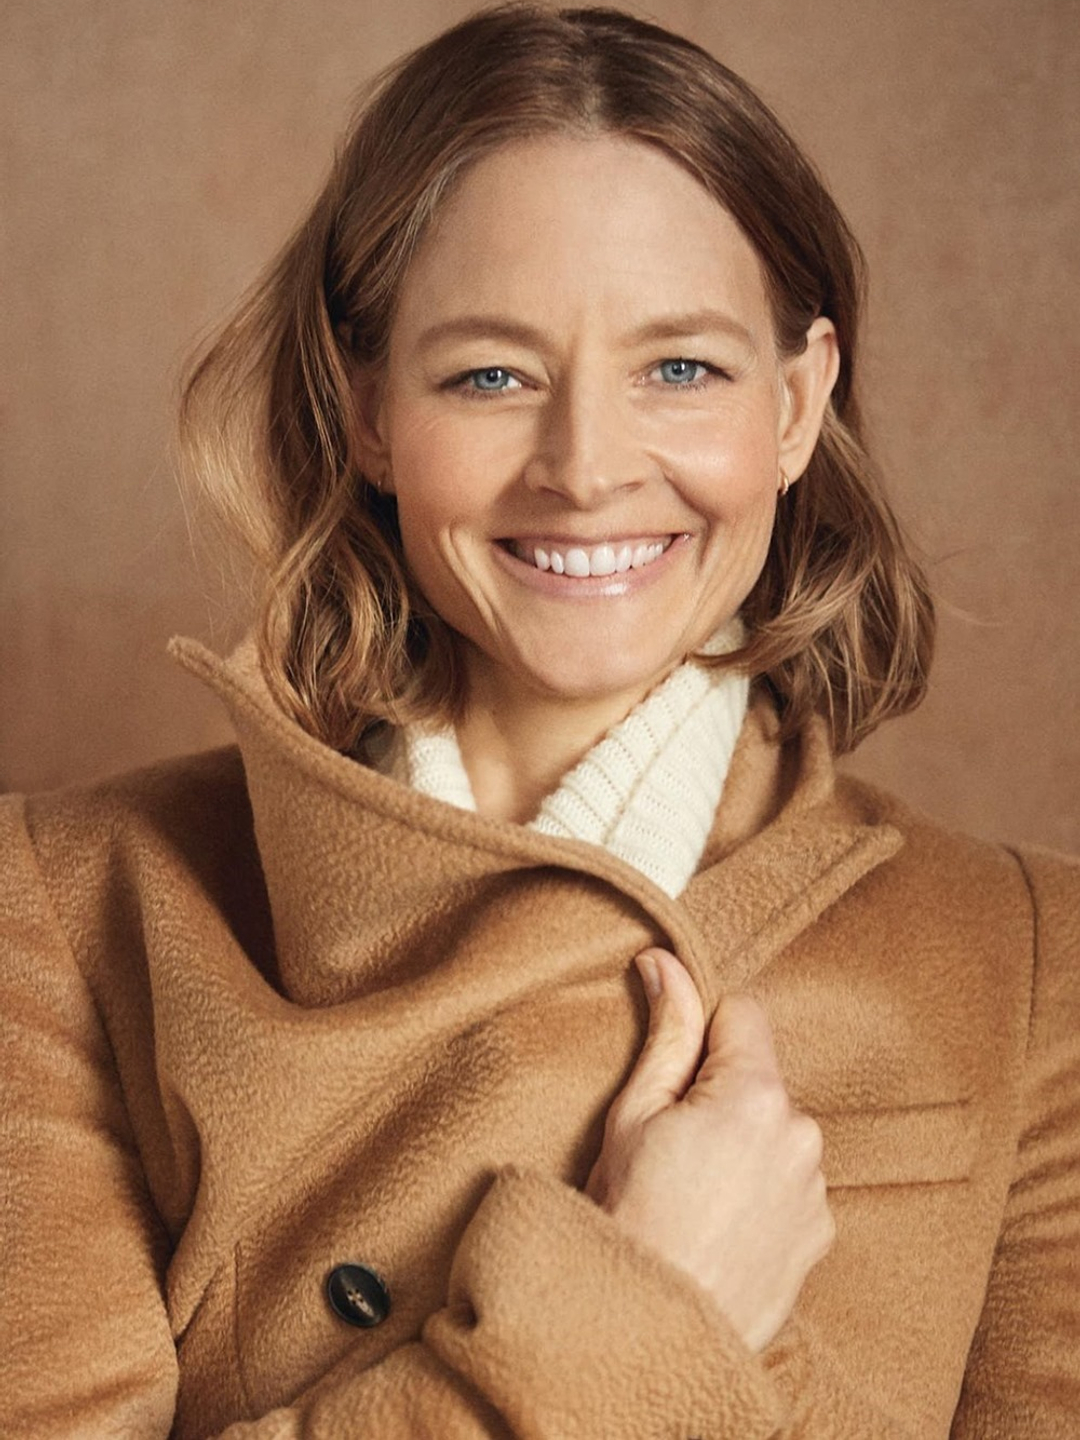 Jodie Foster appearance